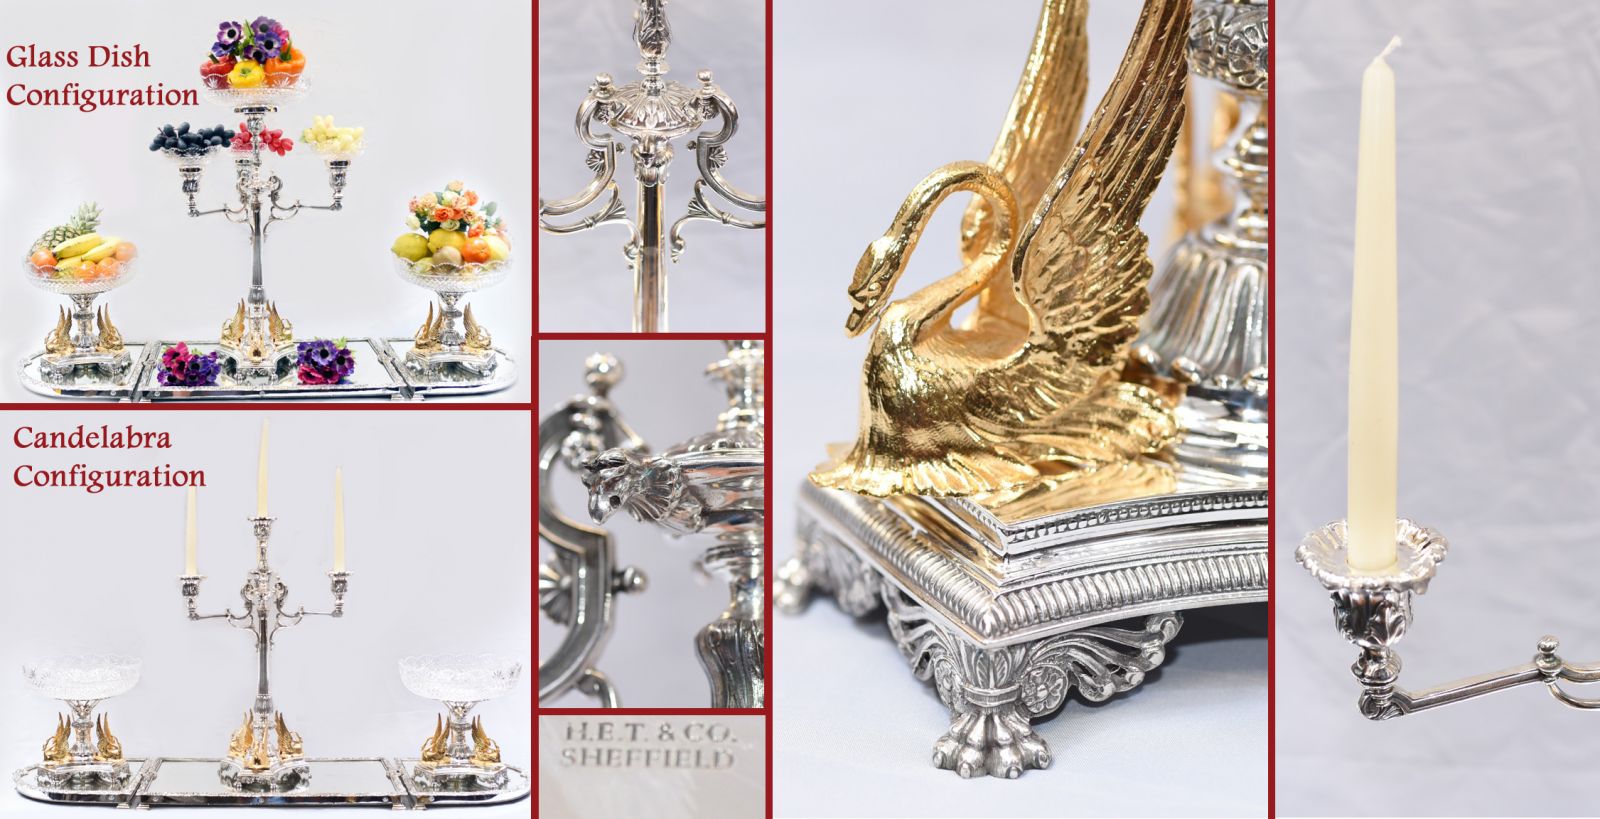 Sheffield silver plate epergne converts from candelabra to glass dish